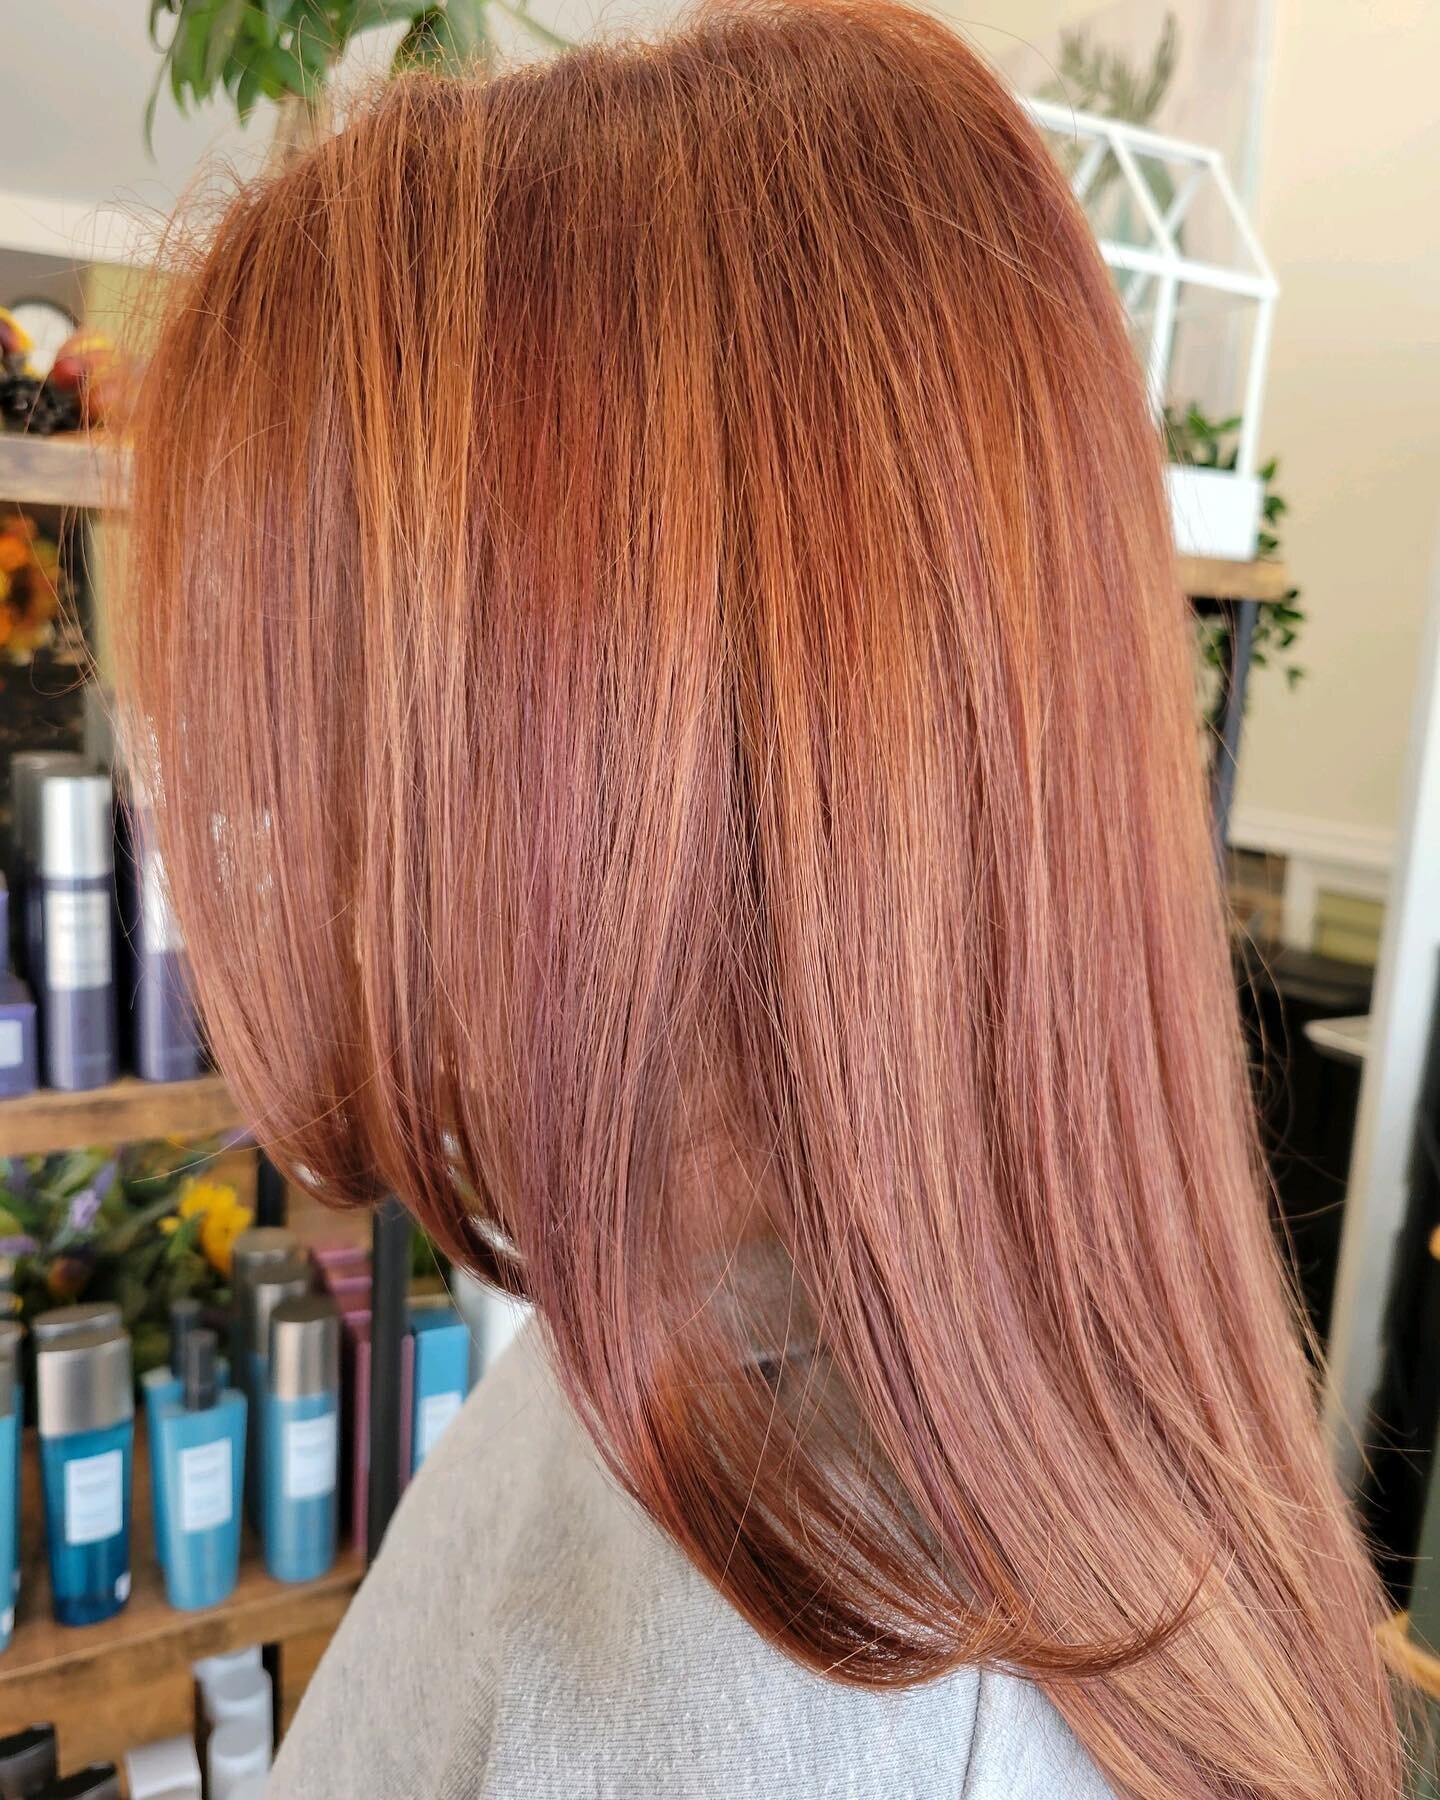 Cinnamon spice and everything nice by Ron May 

Call us at 856.624.9140 to book your appointment. 

#goldwell #goldwellcolor #goldwellapprovedus #goldwellcolorance #goldwellpurepigments #goldwelltopchic #goldwellsalon #njsalon #njstylist #behindthech